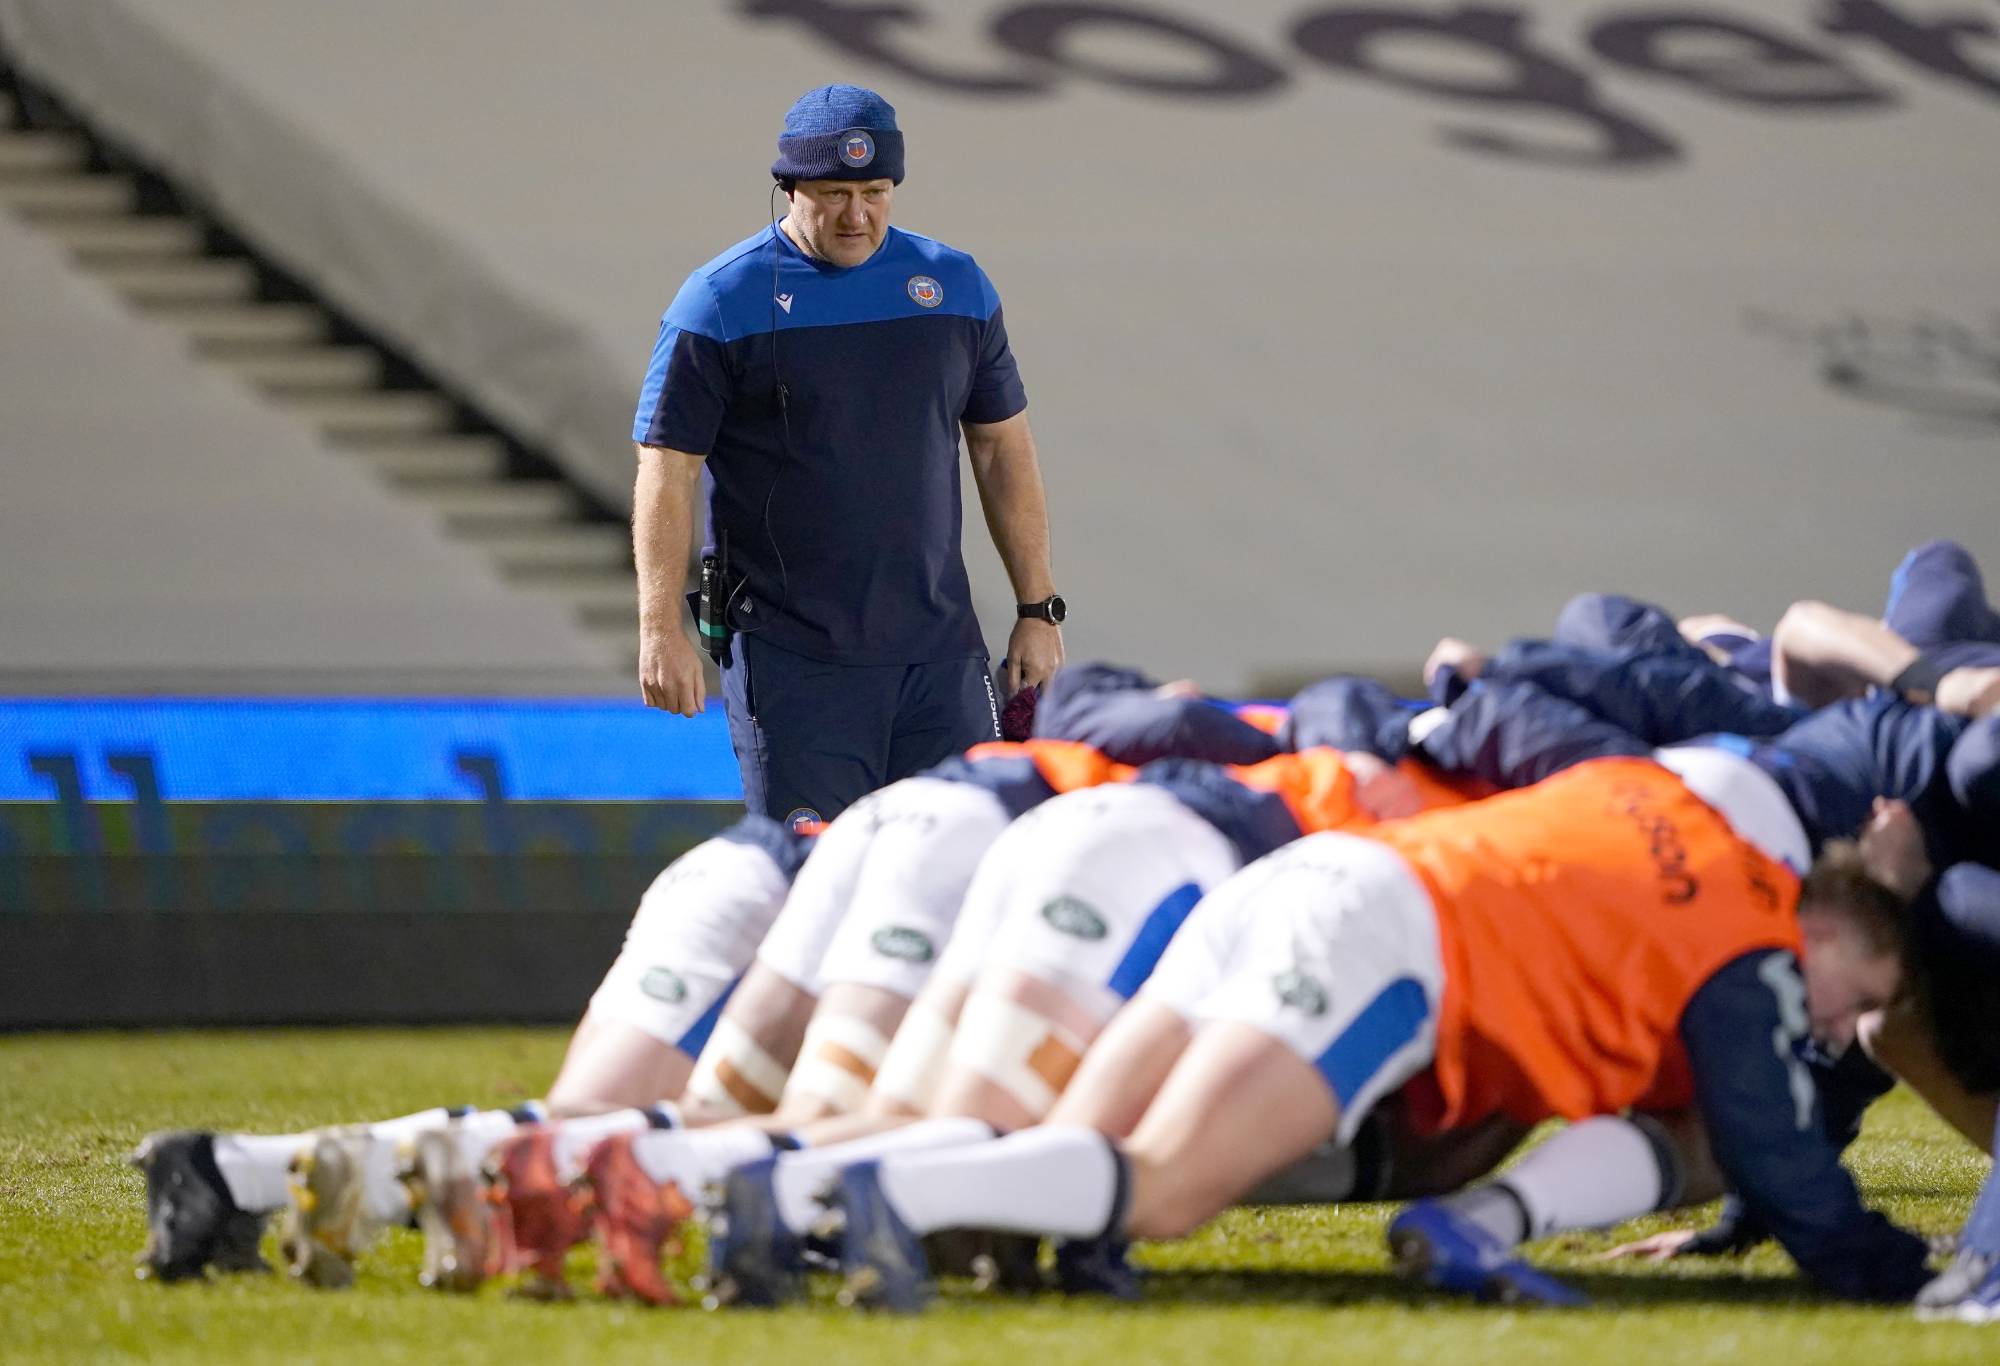 Bath head coach Neal Hatley watches his players warm up prior to the Gallagher Premiership match The AJ Bell Stadium, Salford. Picture date: Friday February 12, 2021. (Photo by Zac Goodwin/PA Images via Getty Images)